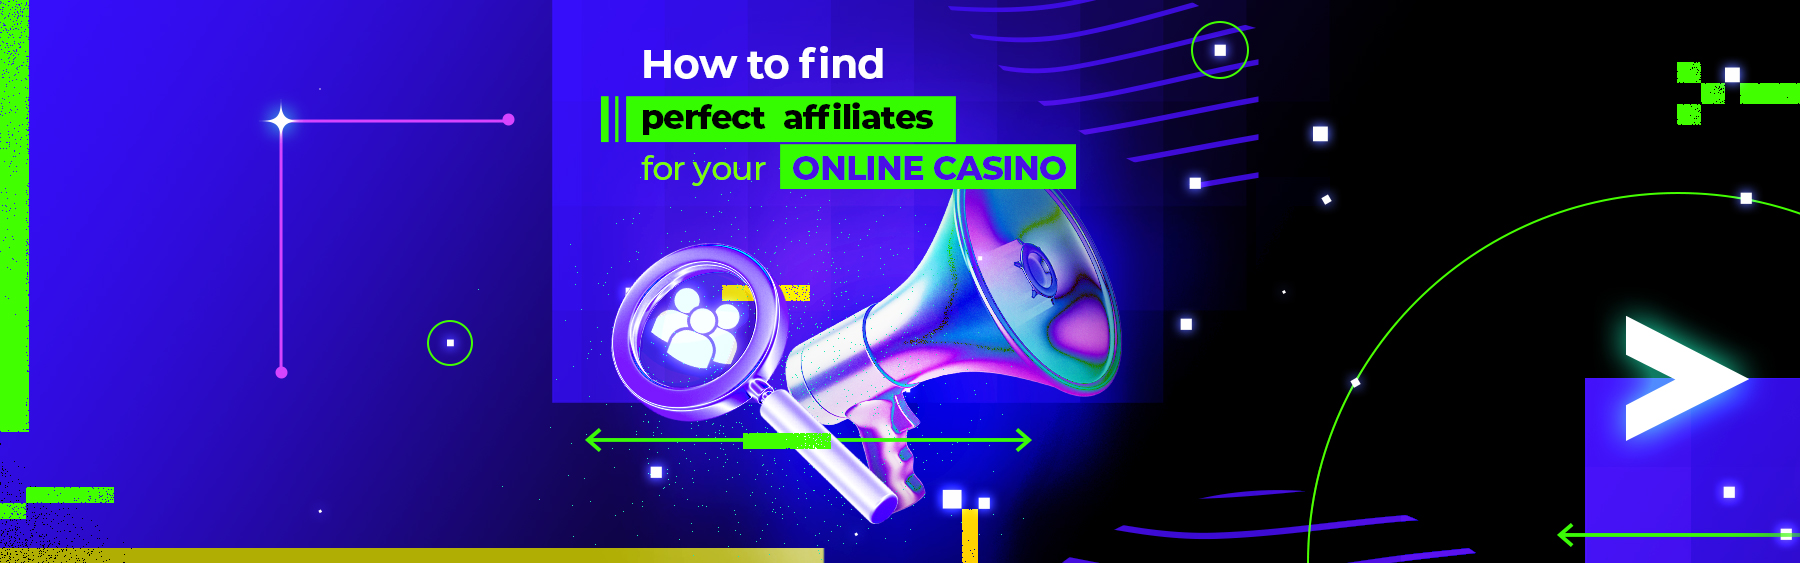 How to find perfect affiliates for your online casino